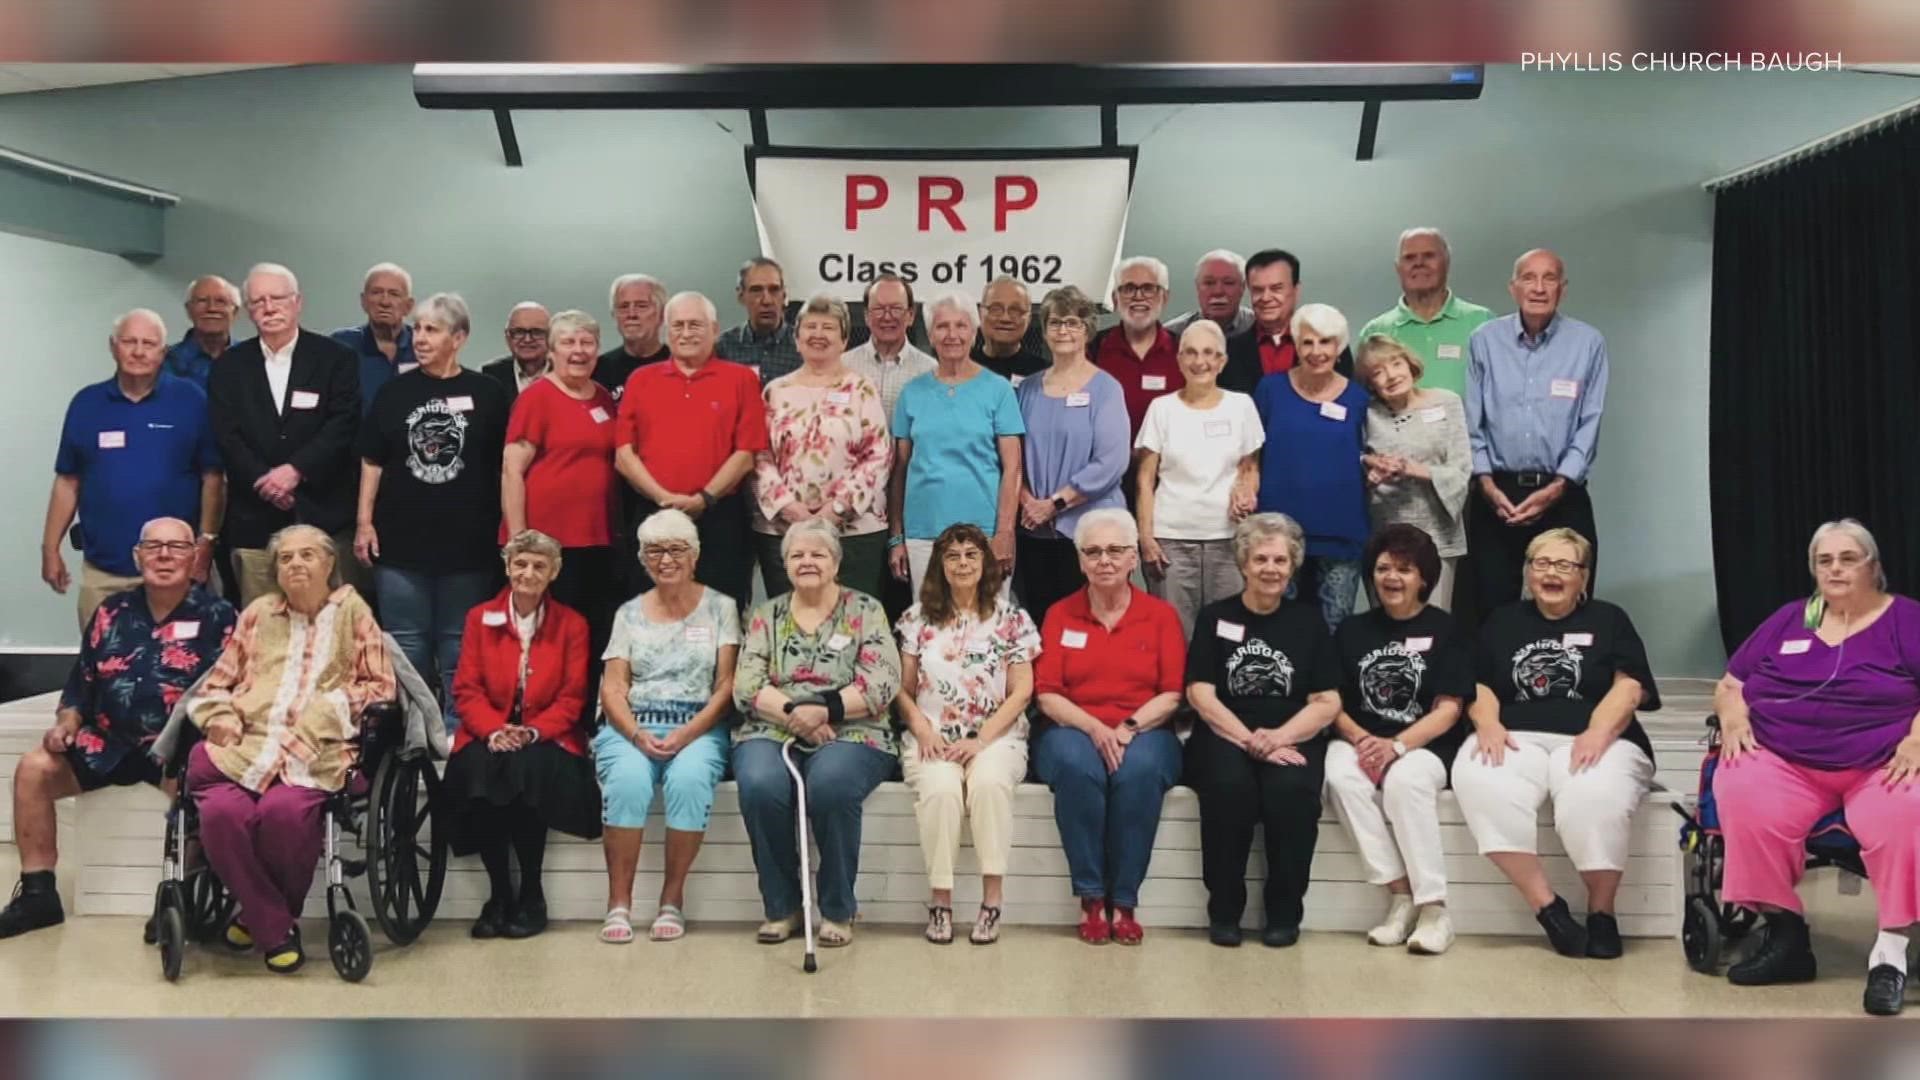 Over 30 classmates came together 60 years later to share stories and memories from decades past.